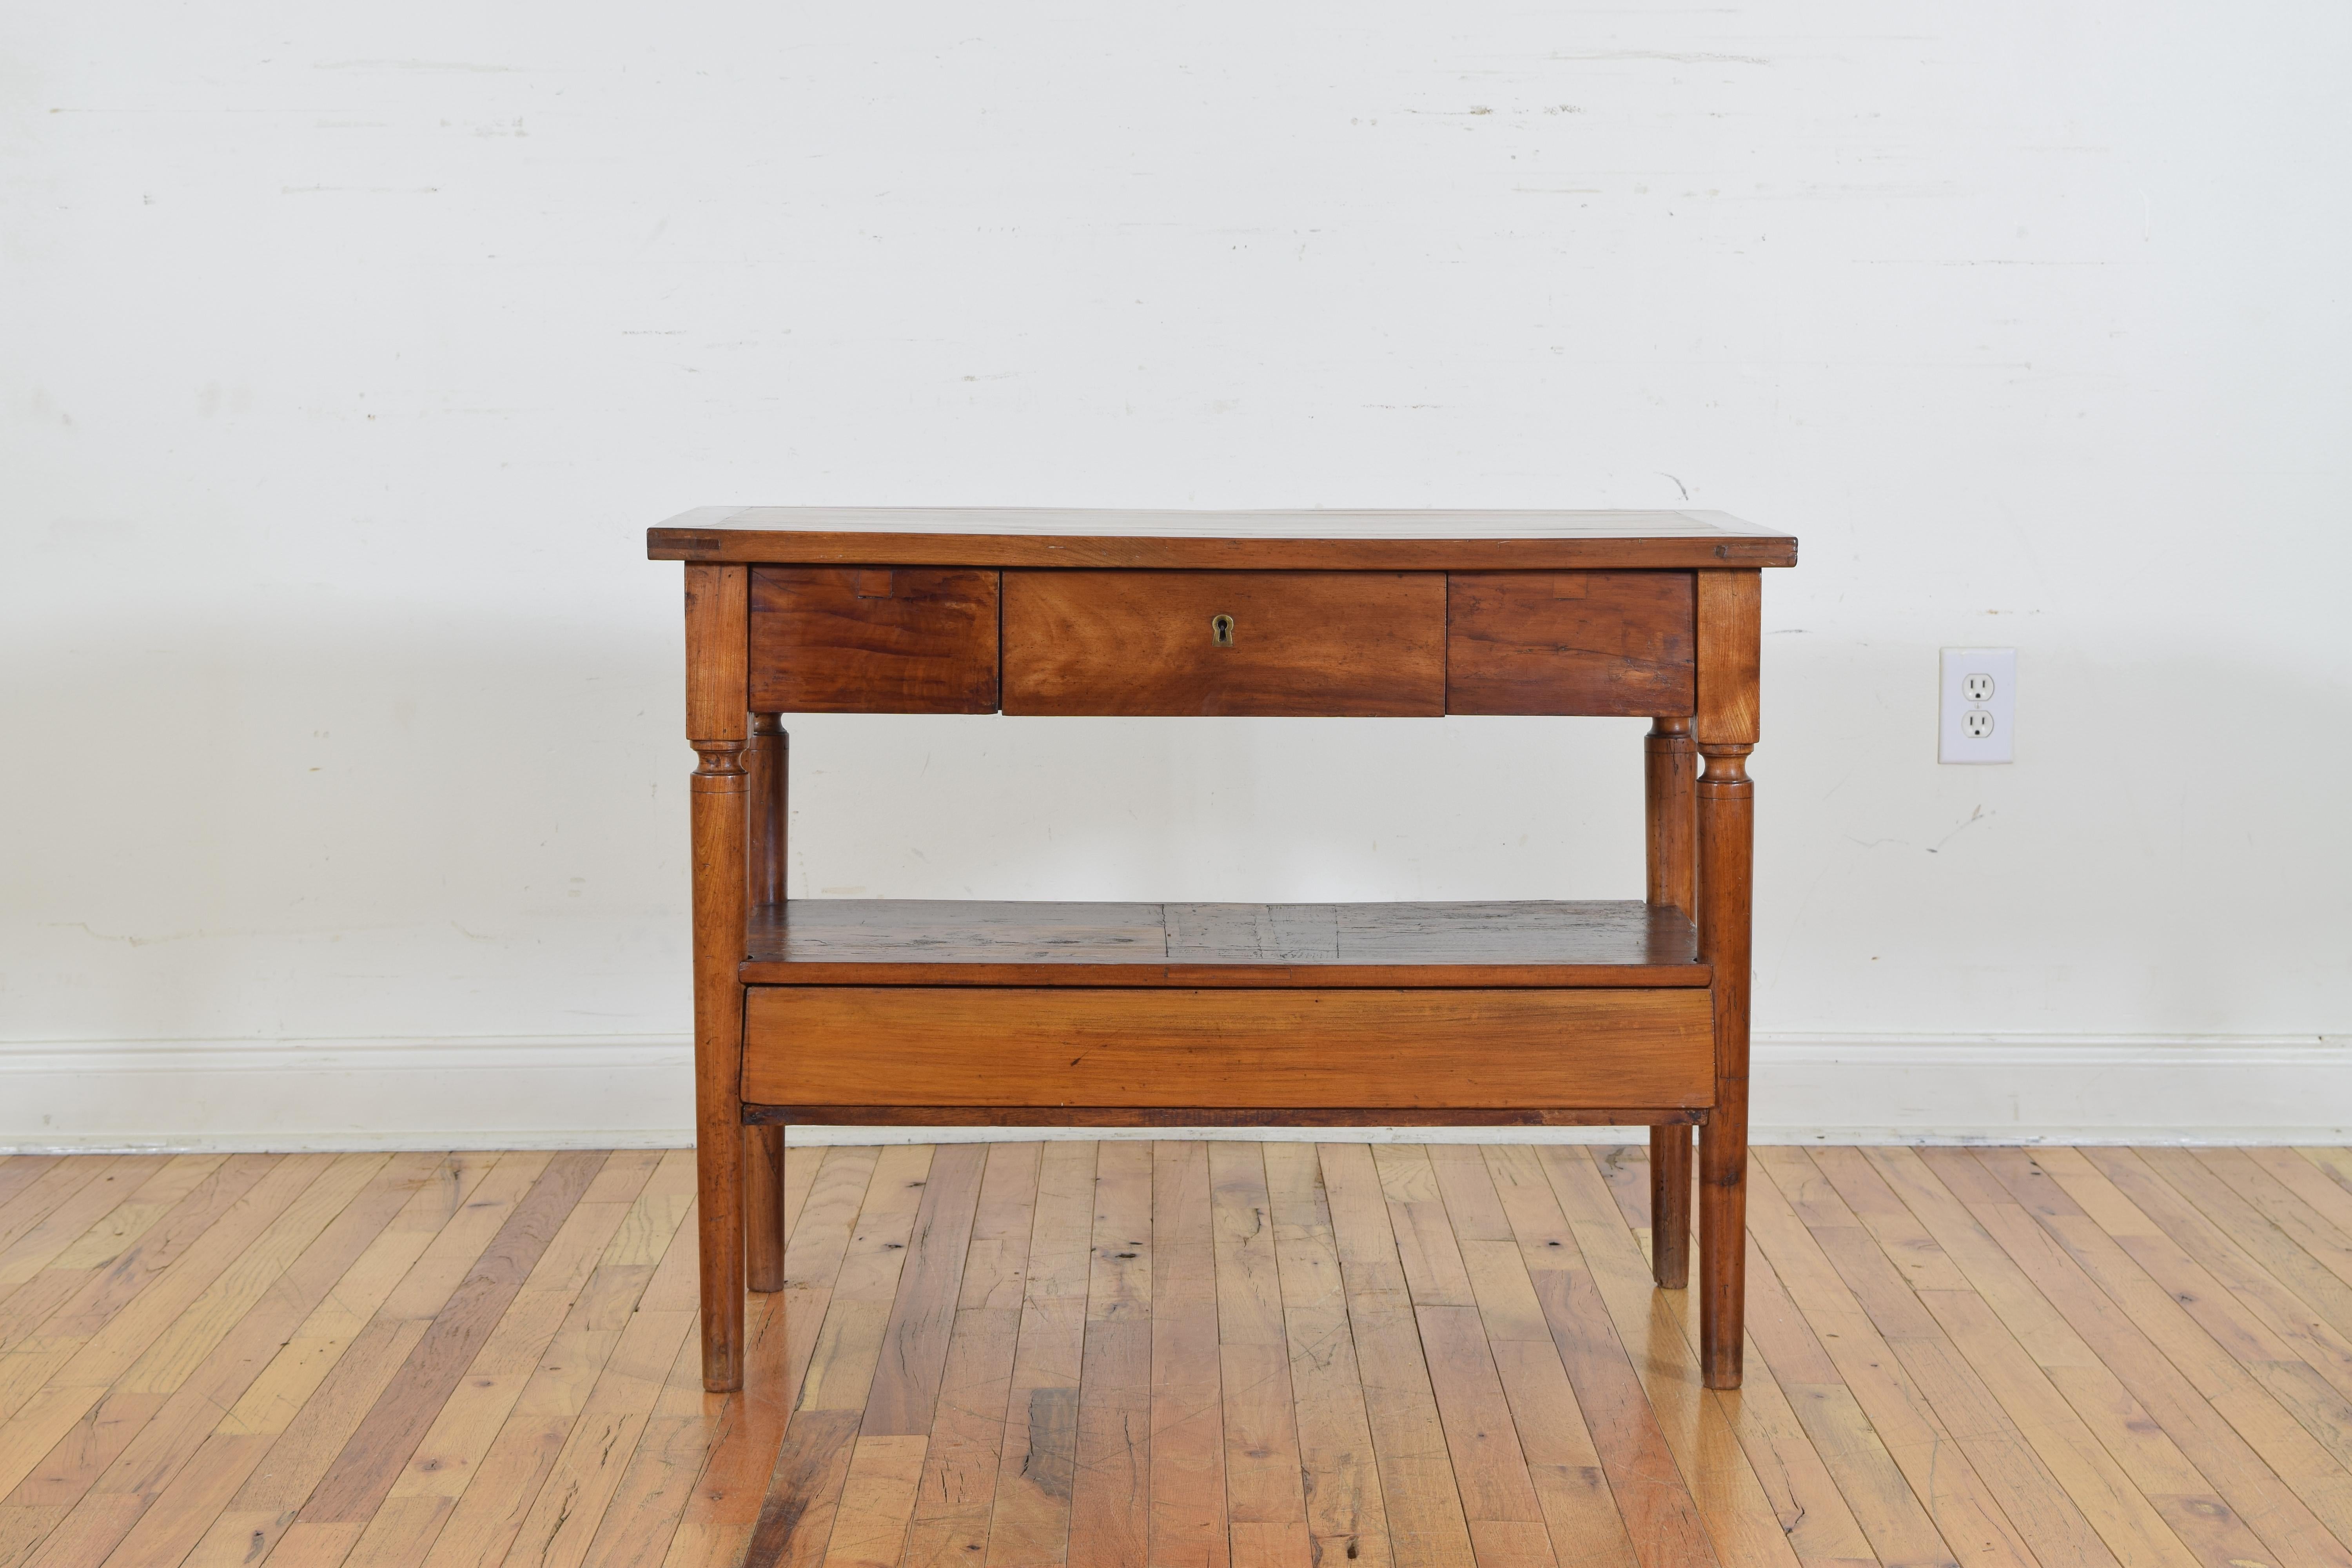 The rectangular top above a conforming case, raised on turned tapering legs, the lower section housing one wide drawer. Second quarter of 19th century.